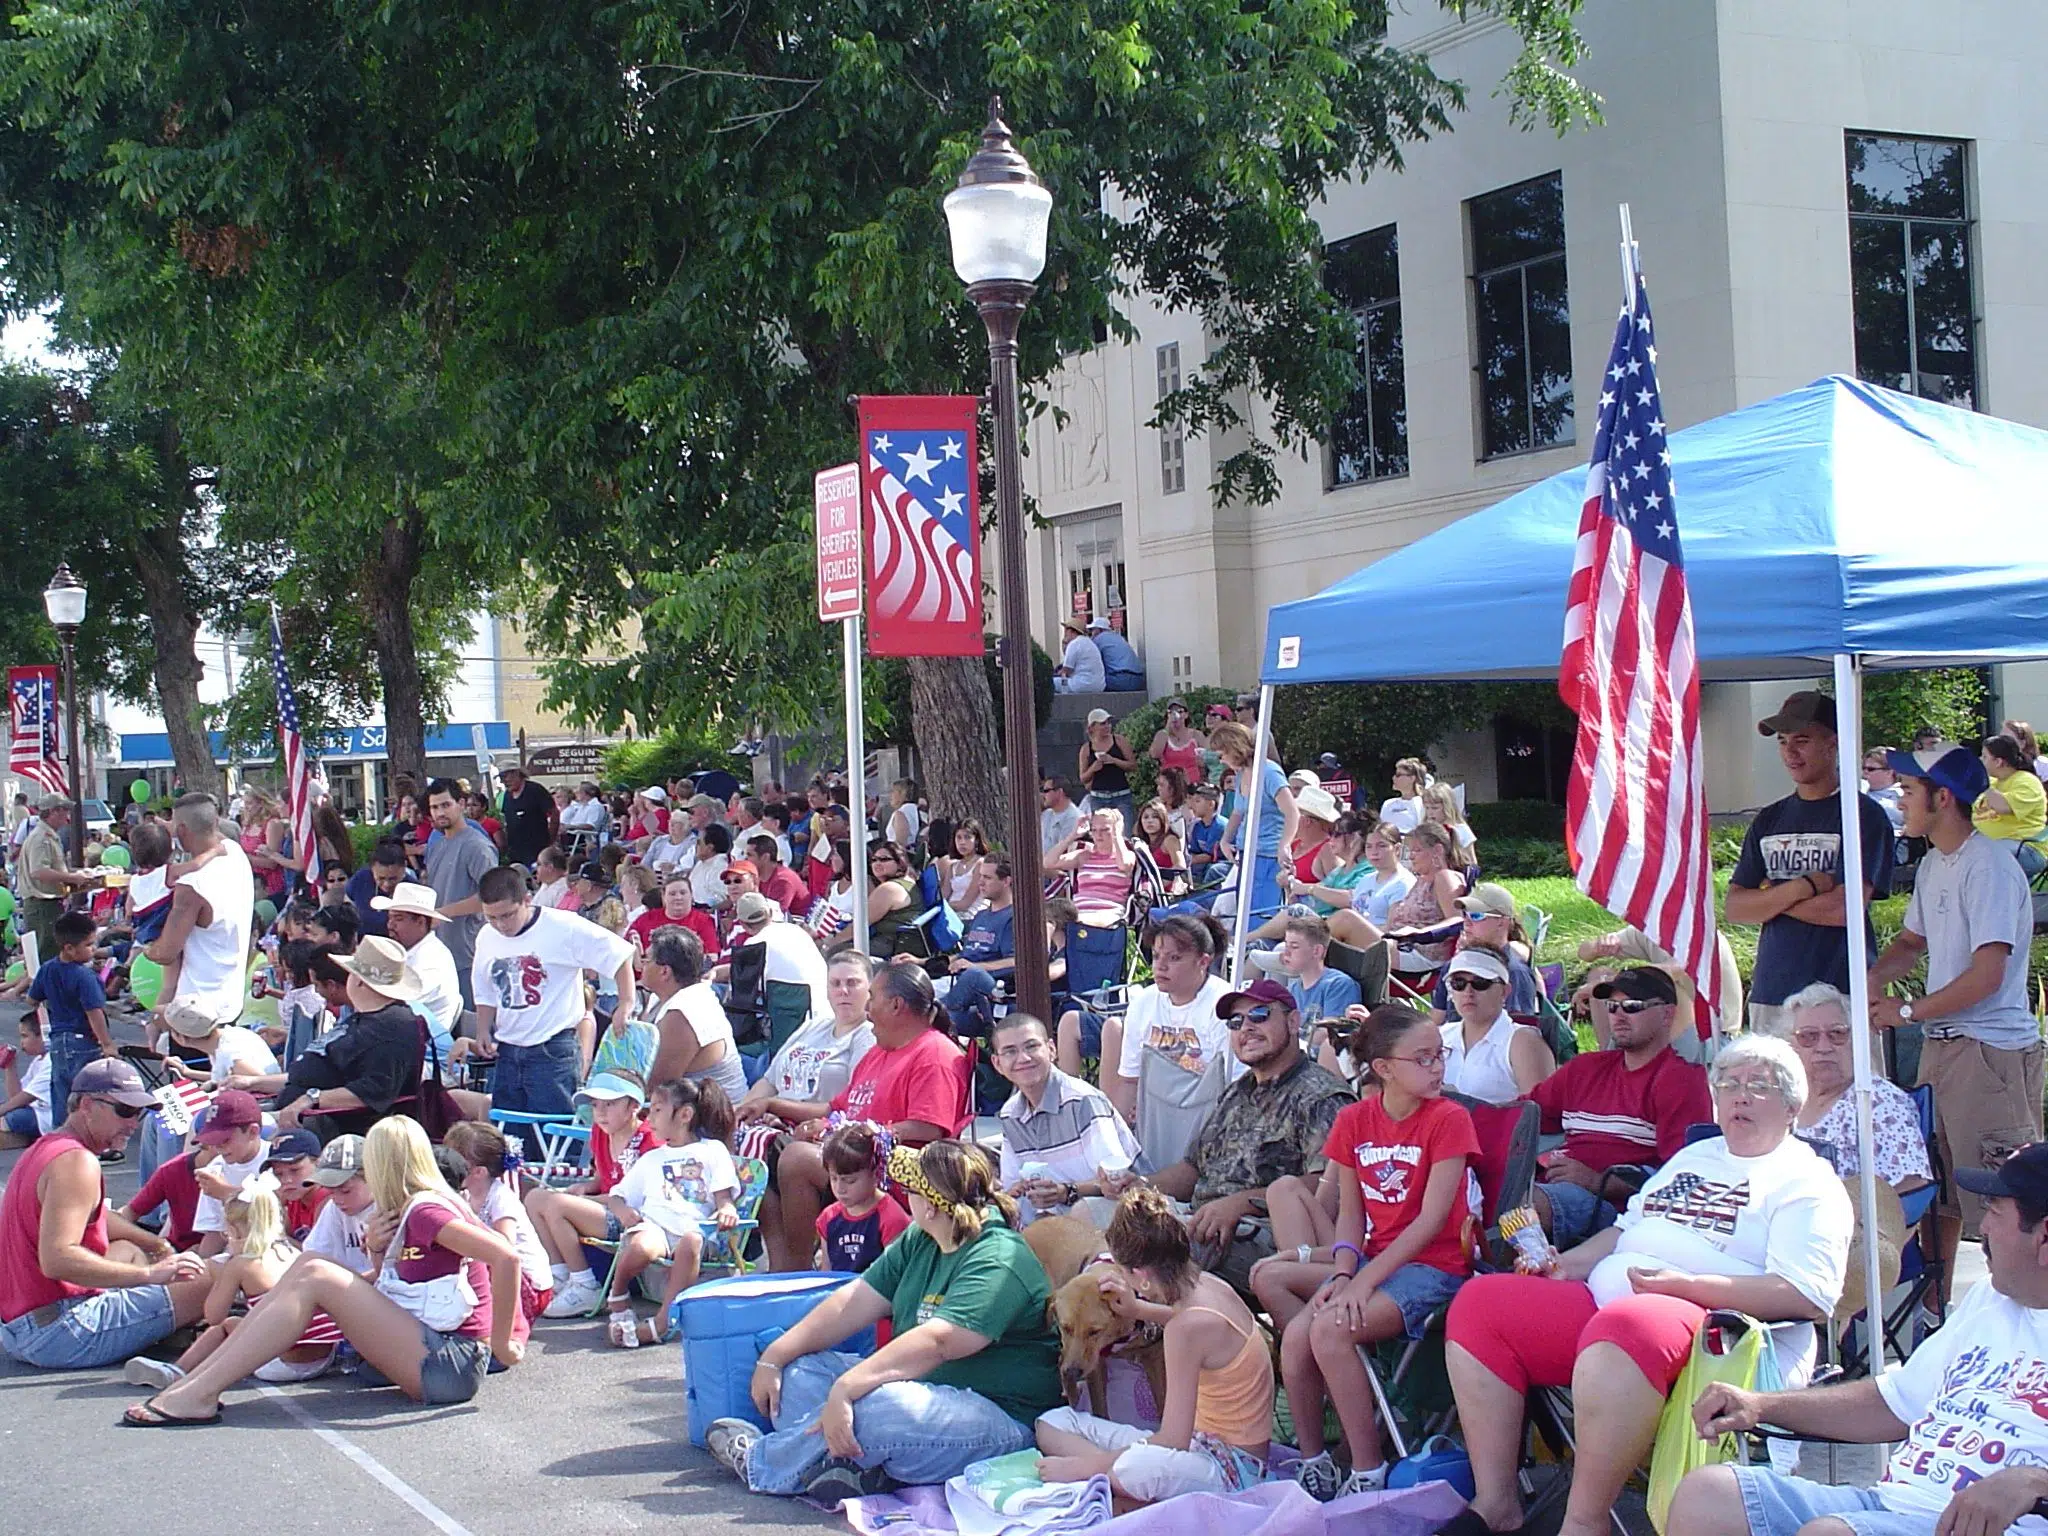 City, County & GRMC Officials Will lead the "Biggest Small-Town 4th of July Parade